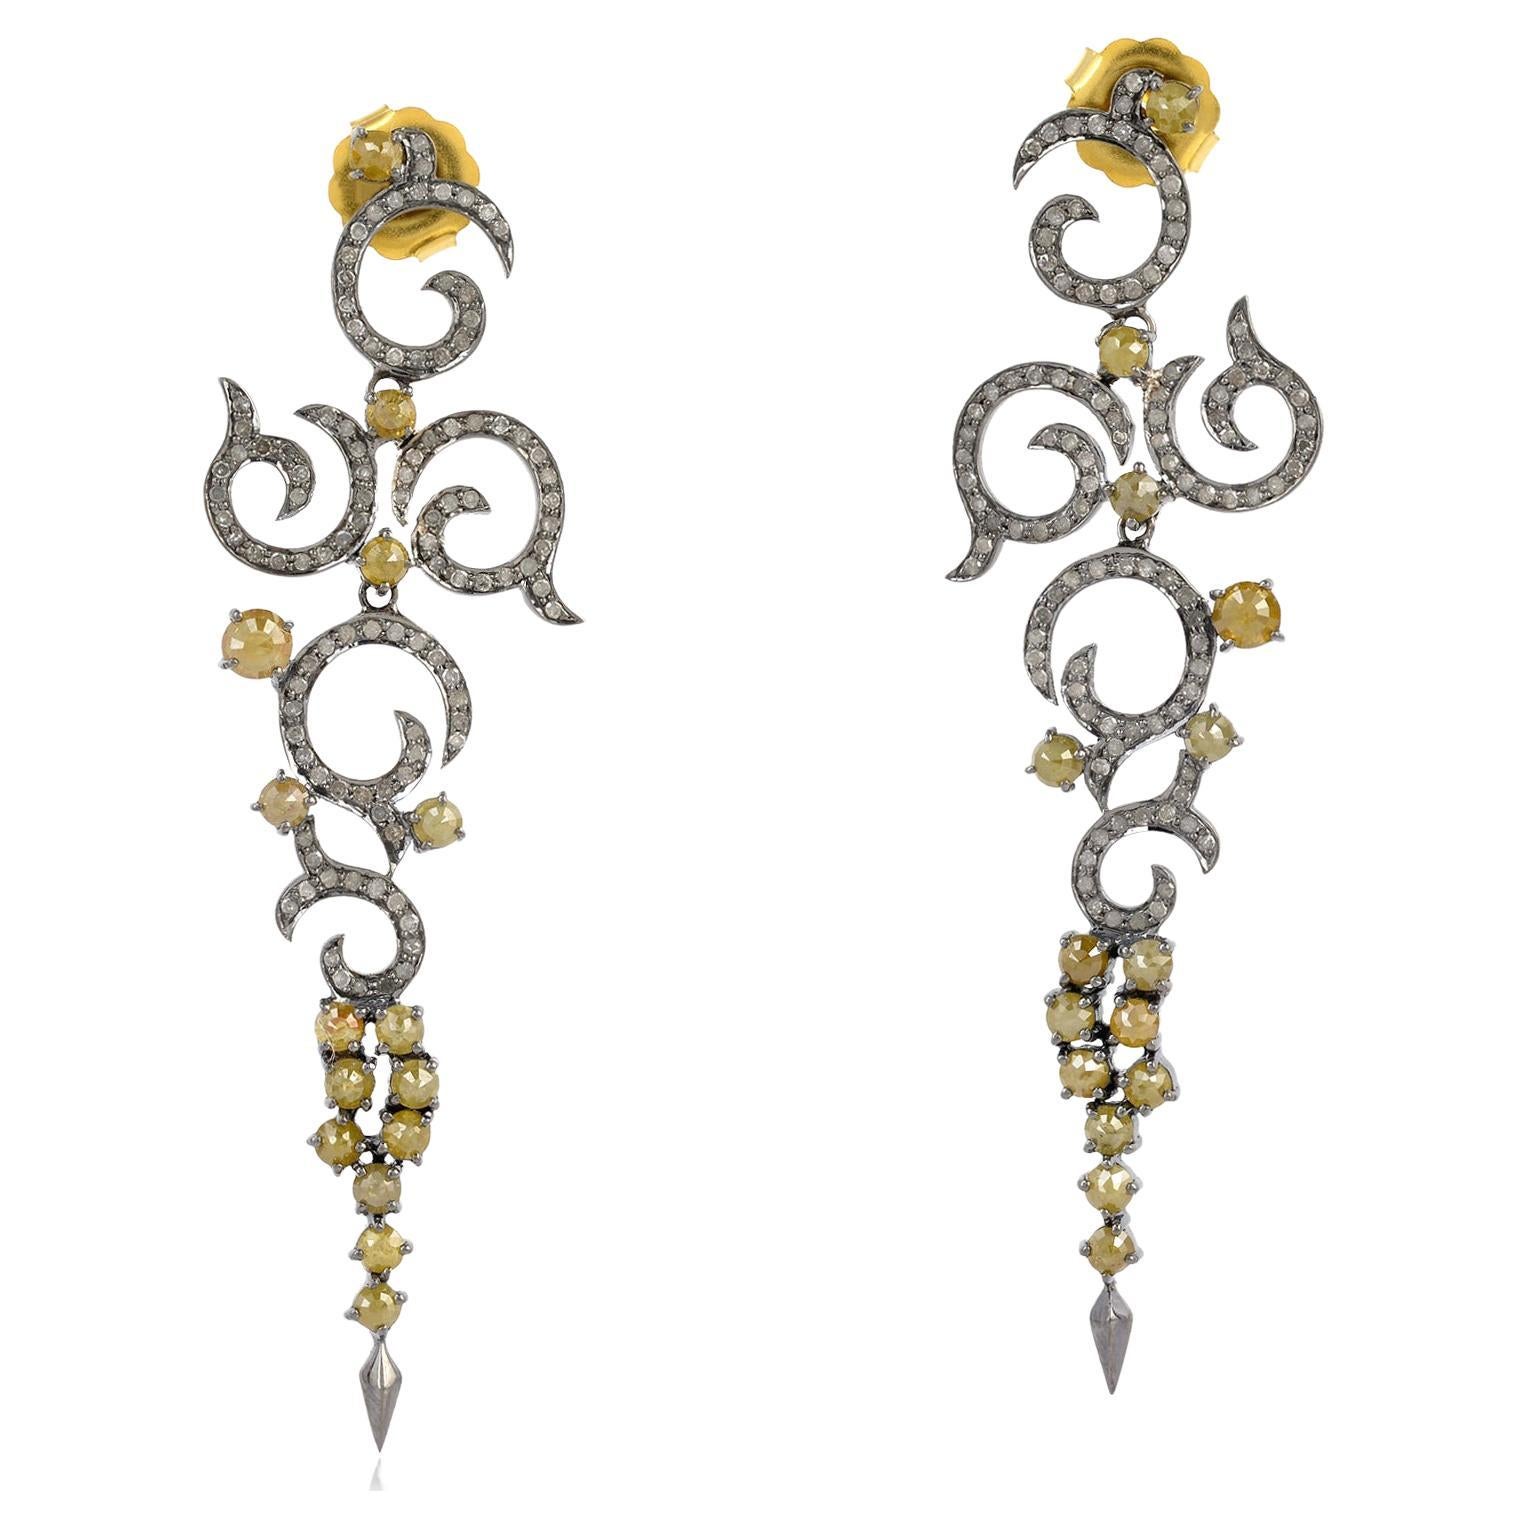 Swirl Design Dangle Earrings with Pave Diamonds Made in 18k Gold & Silver